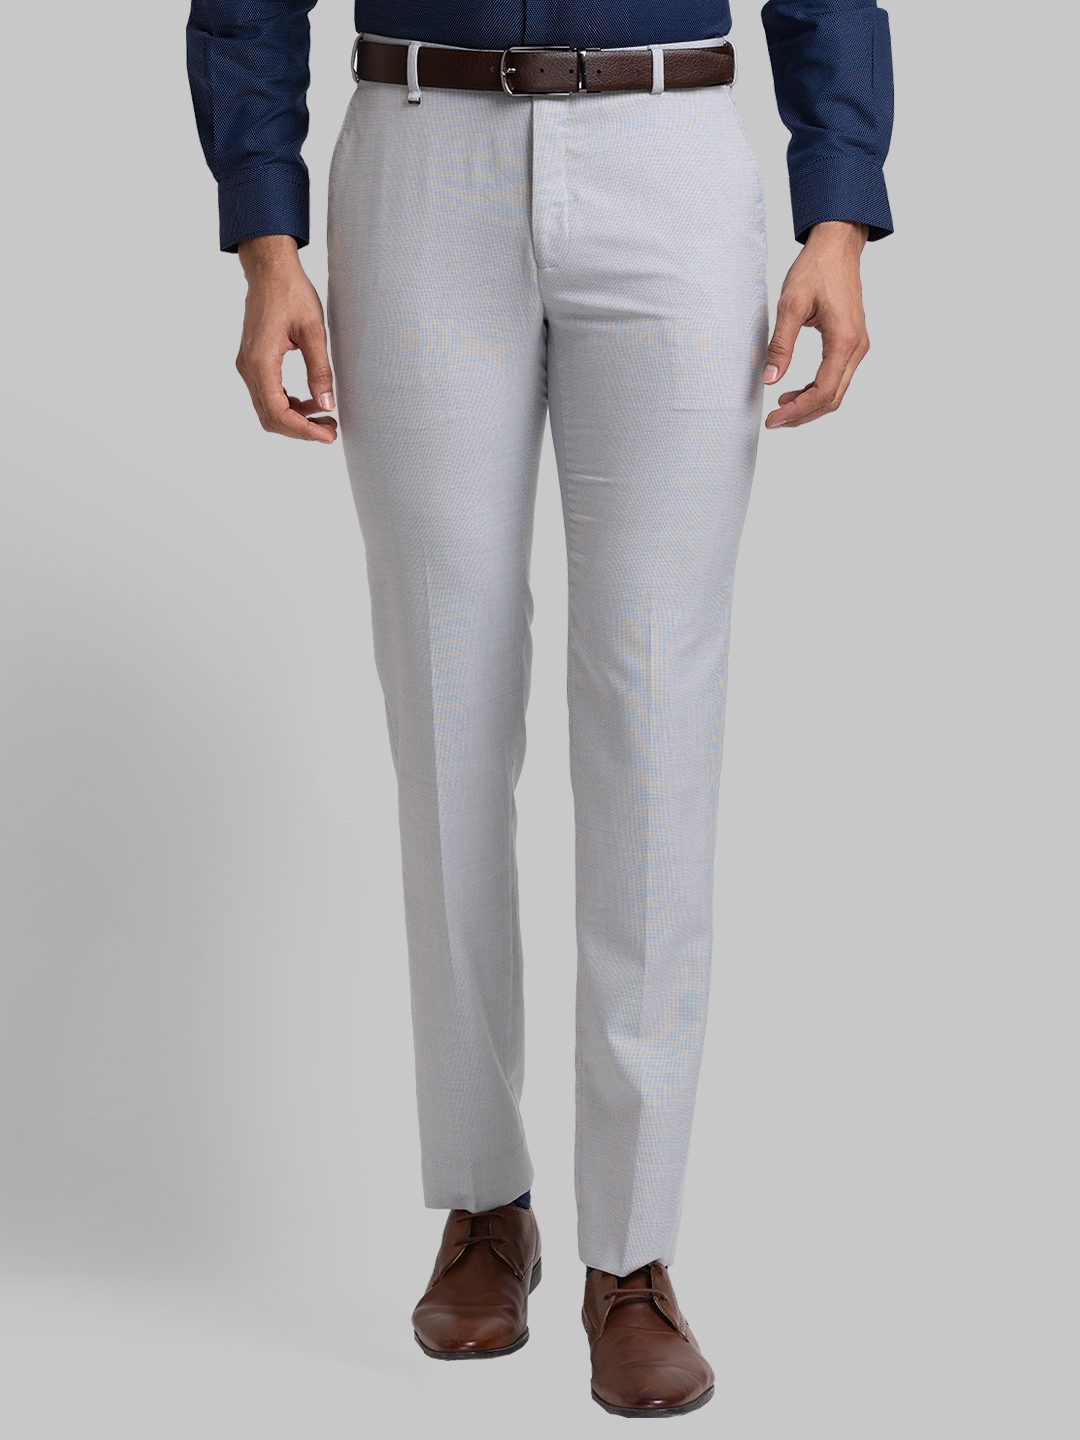 Trousers Collection Online - Rent Designer Mens Trousers for Women and Men  @Rentitbae.com